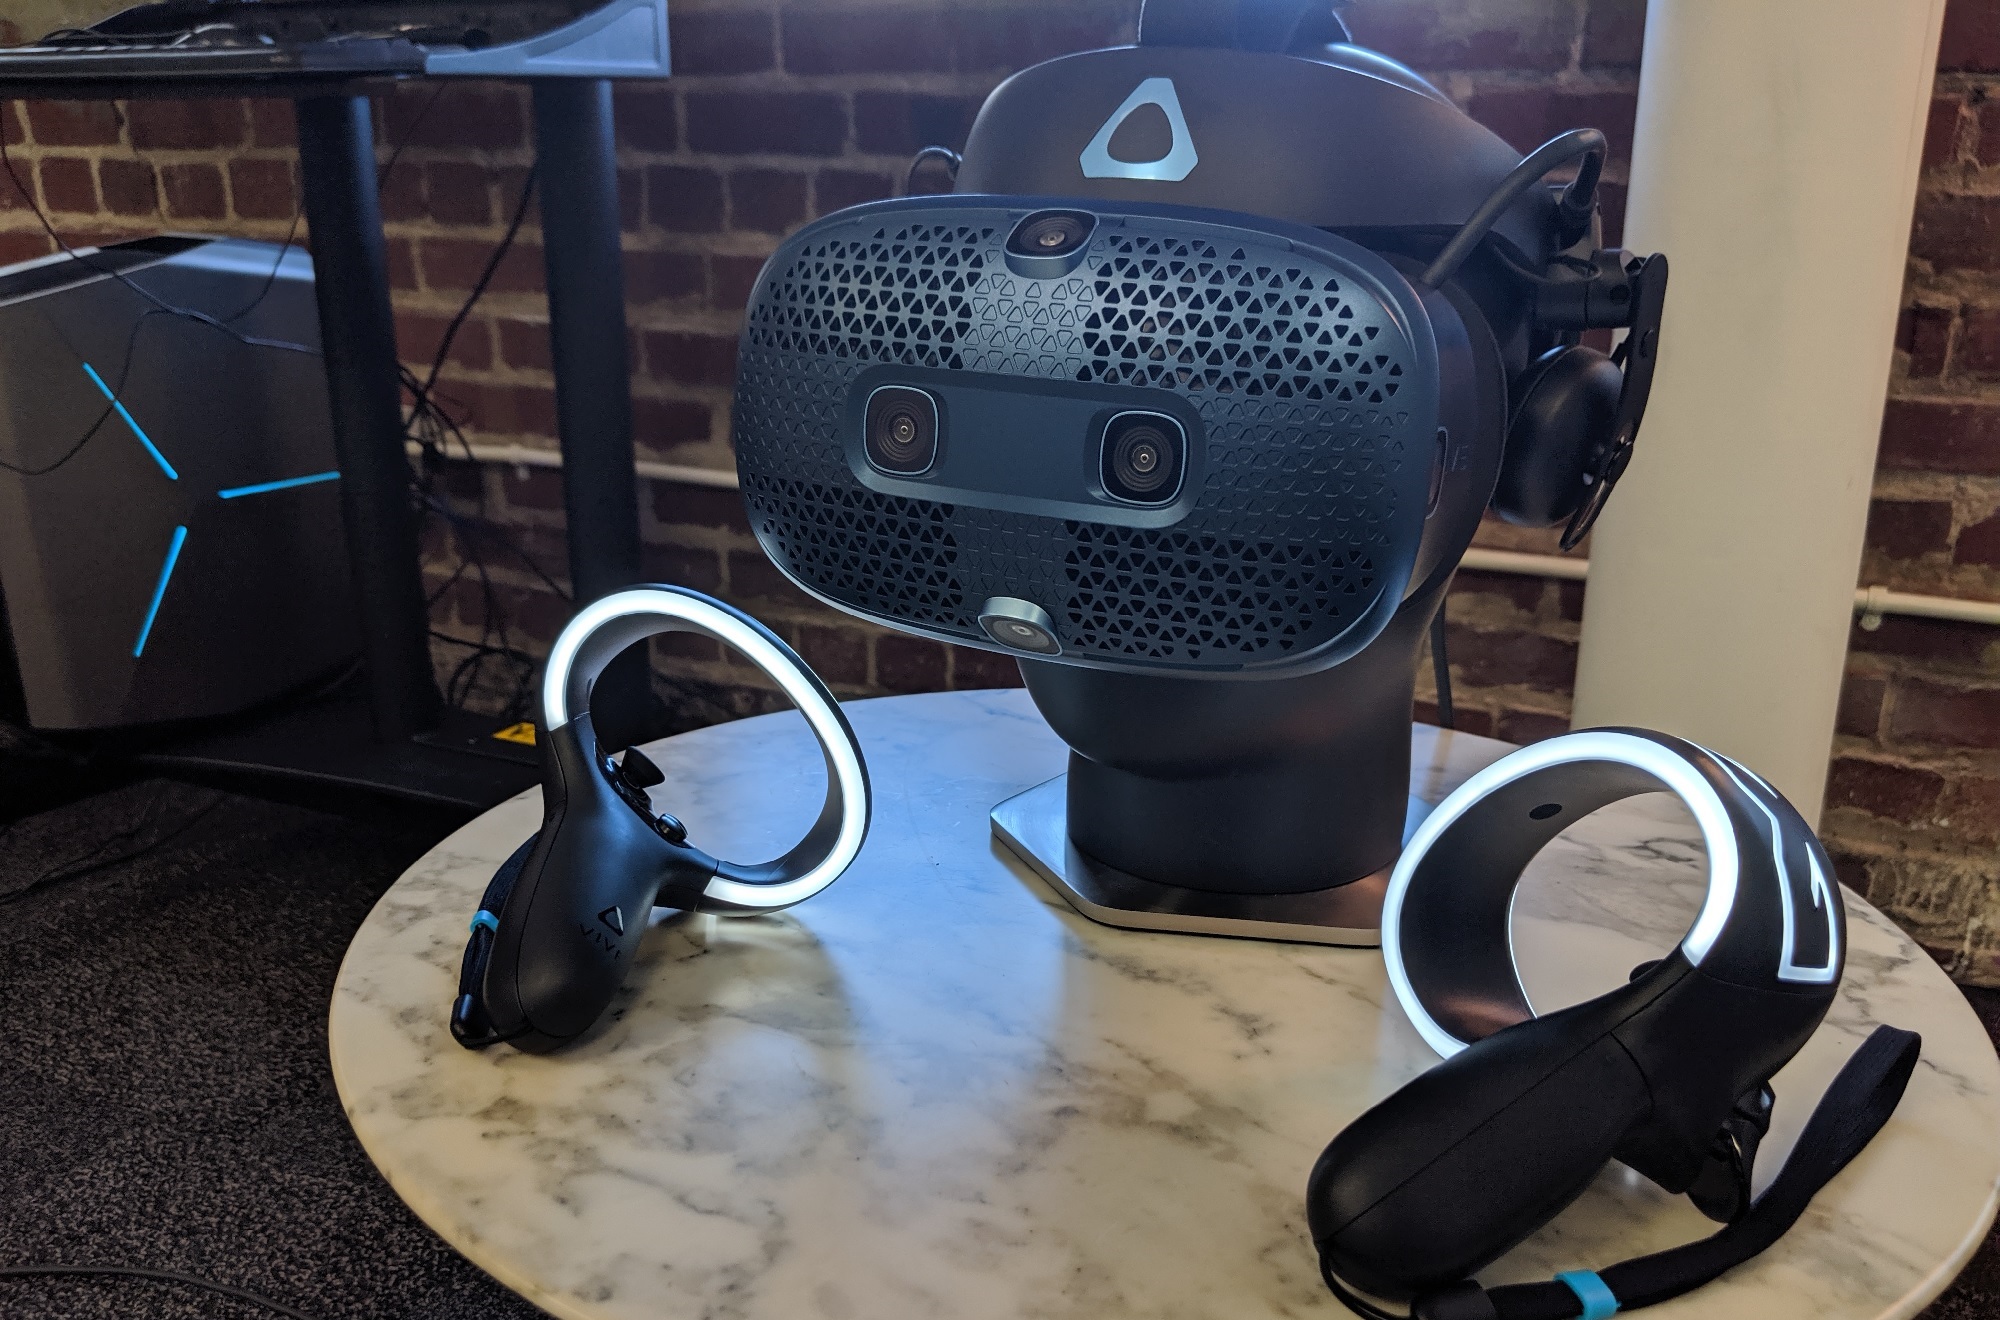 vive cosmos and controllers hands on preview image headset